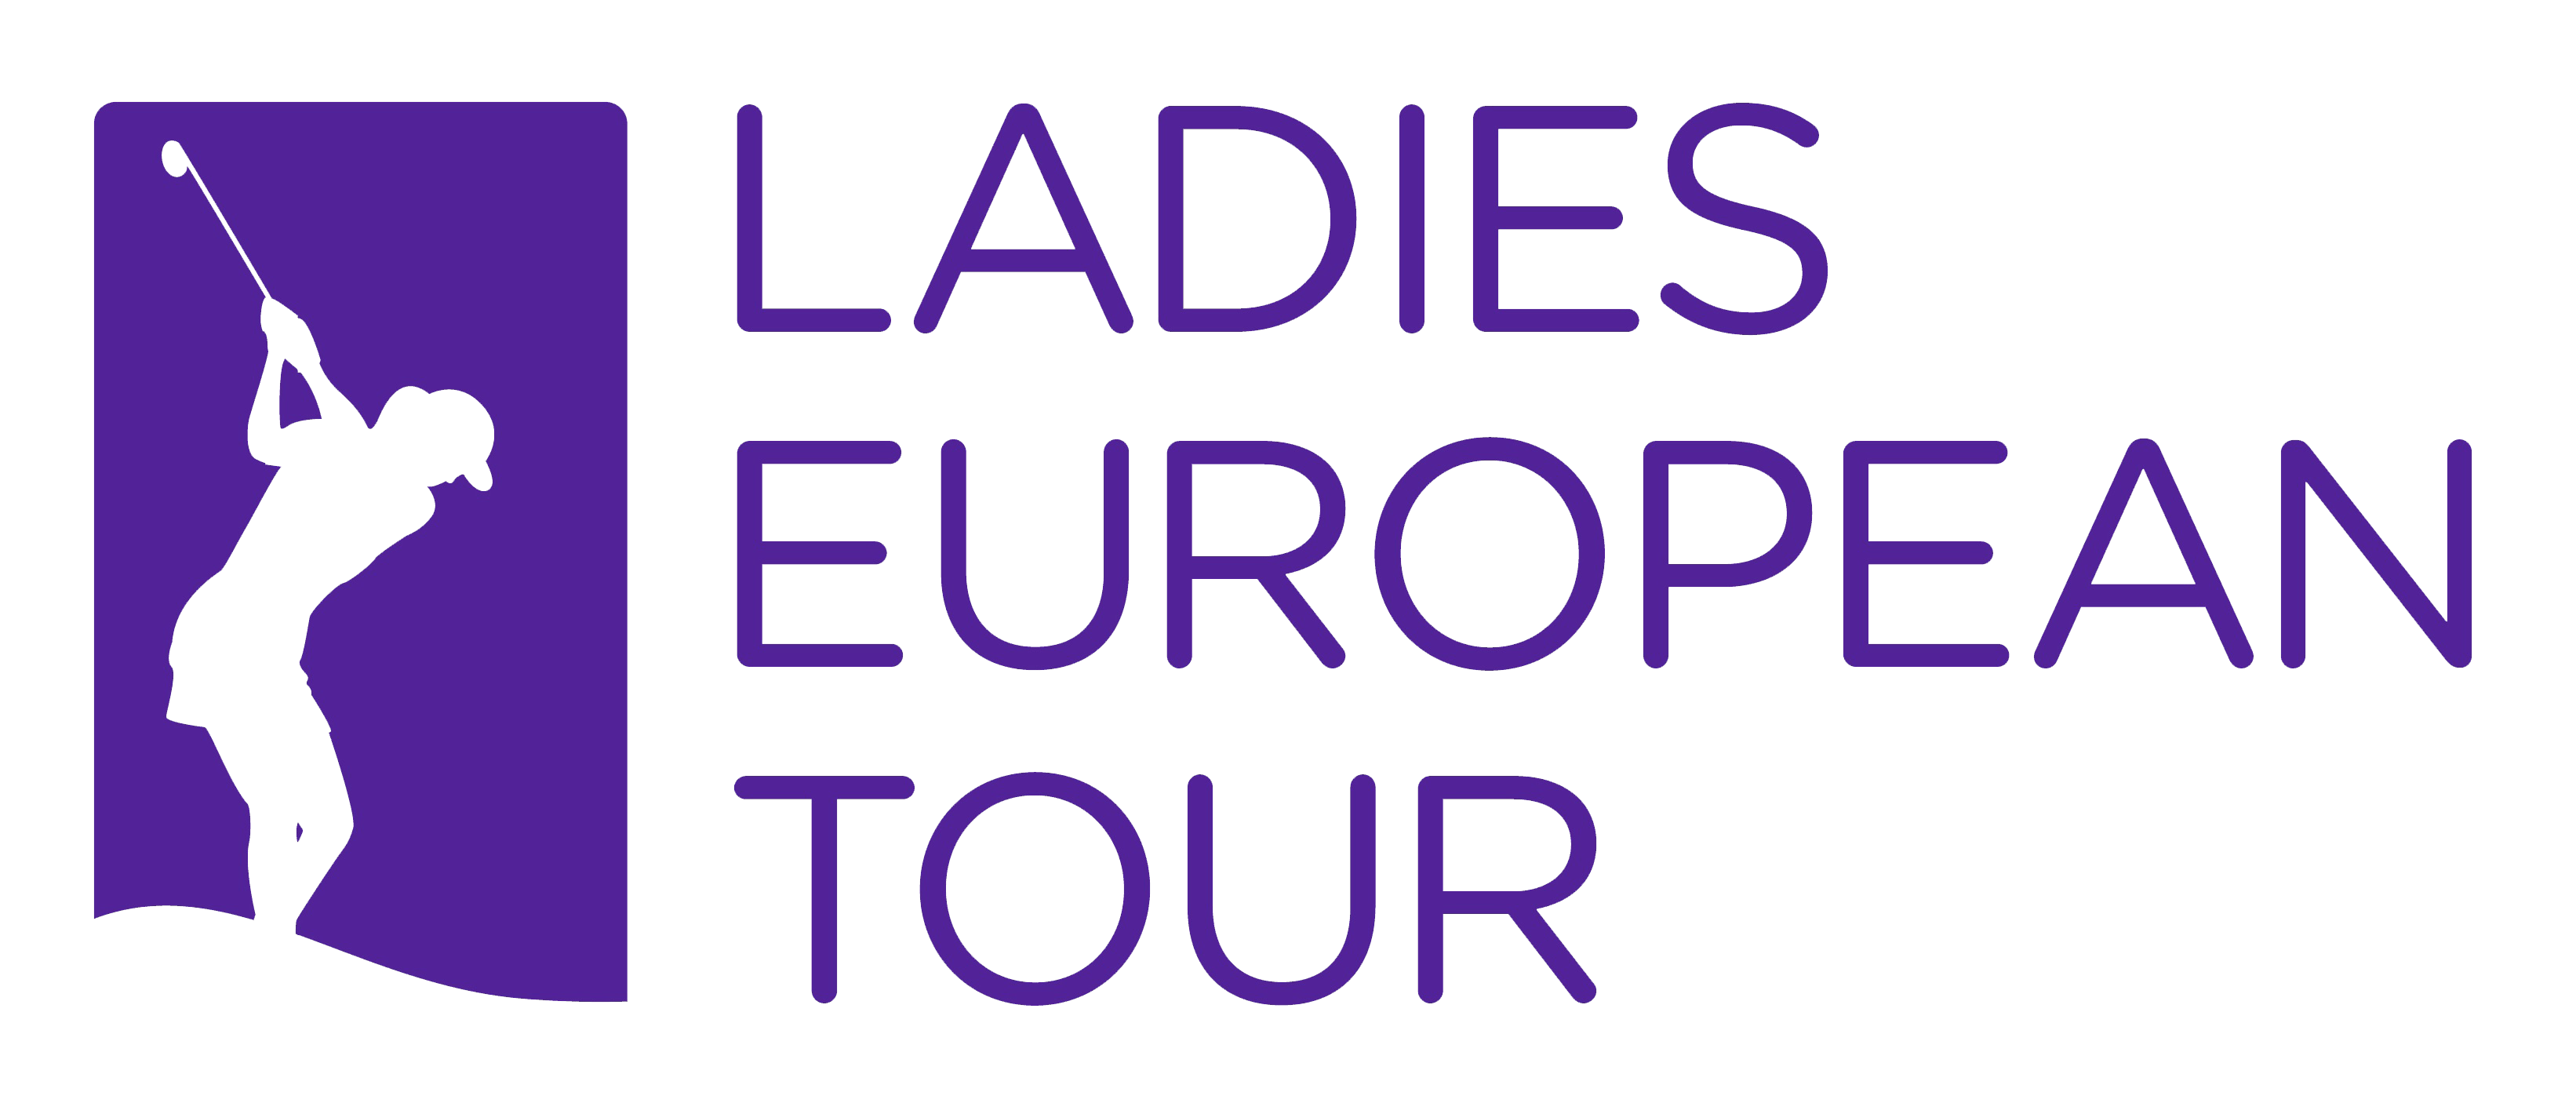 How to Watch Ladies European Tour: 2021 Omega Dubai Moonlight Classic Without Cable